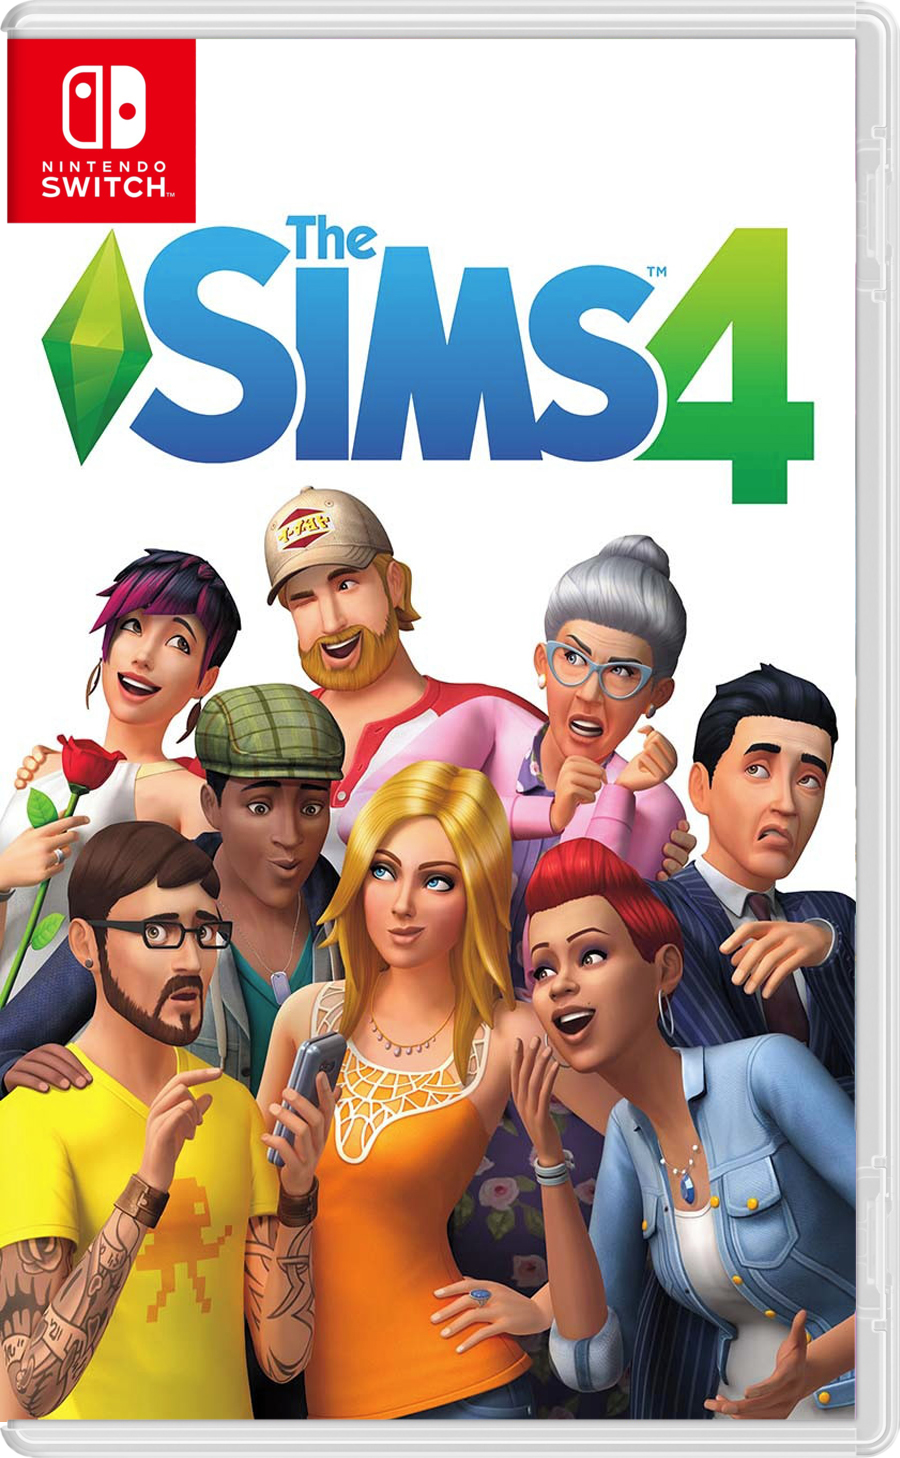 Nintendo Switch Project on Twitter: "The Sims 4 [2013] The Sims Studios, published by: Eletronic Arts RT you want this game on # nintendoswitch (tag your friends and the devs) @